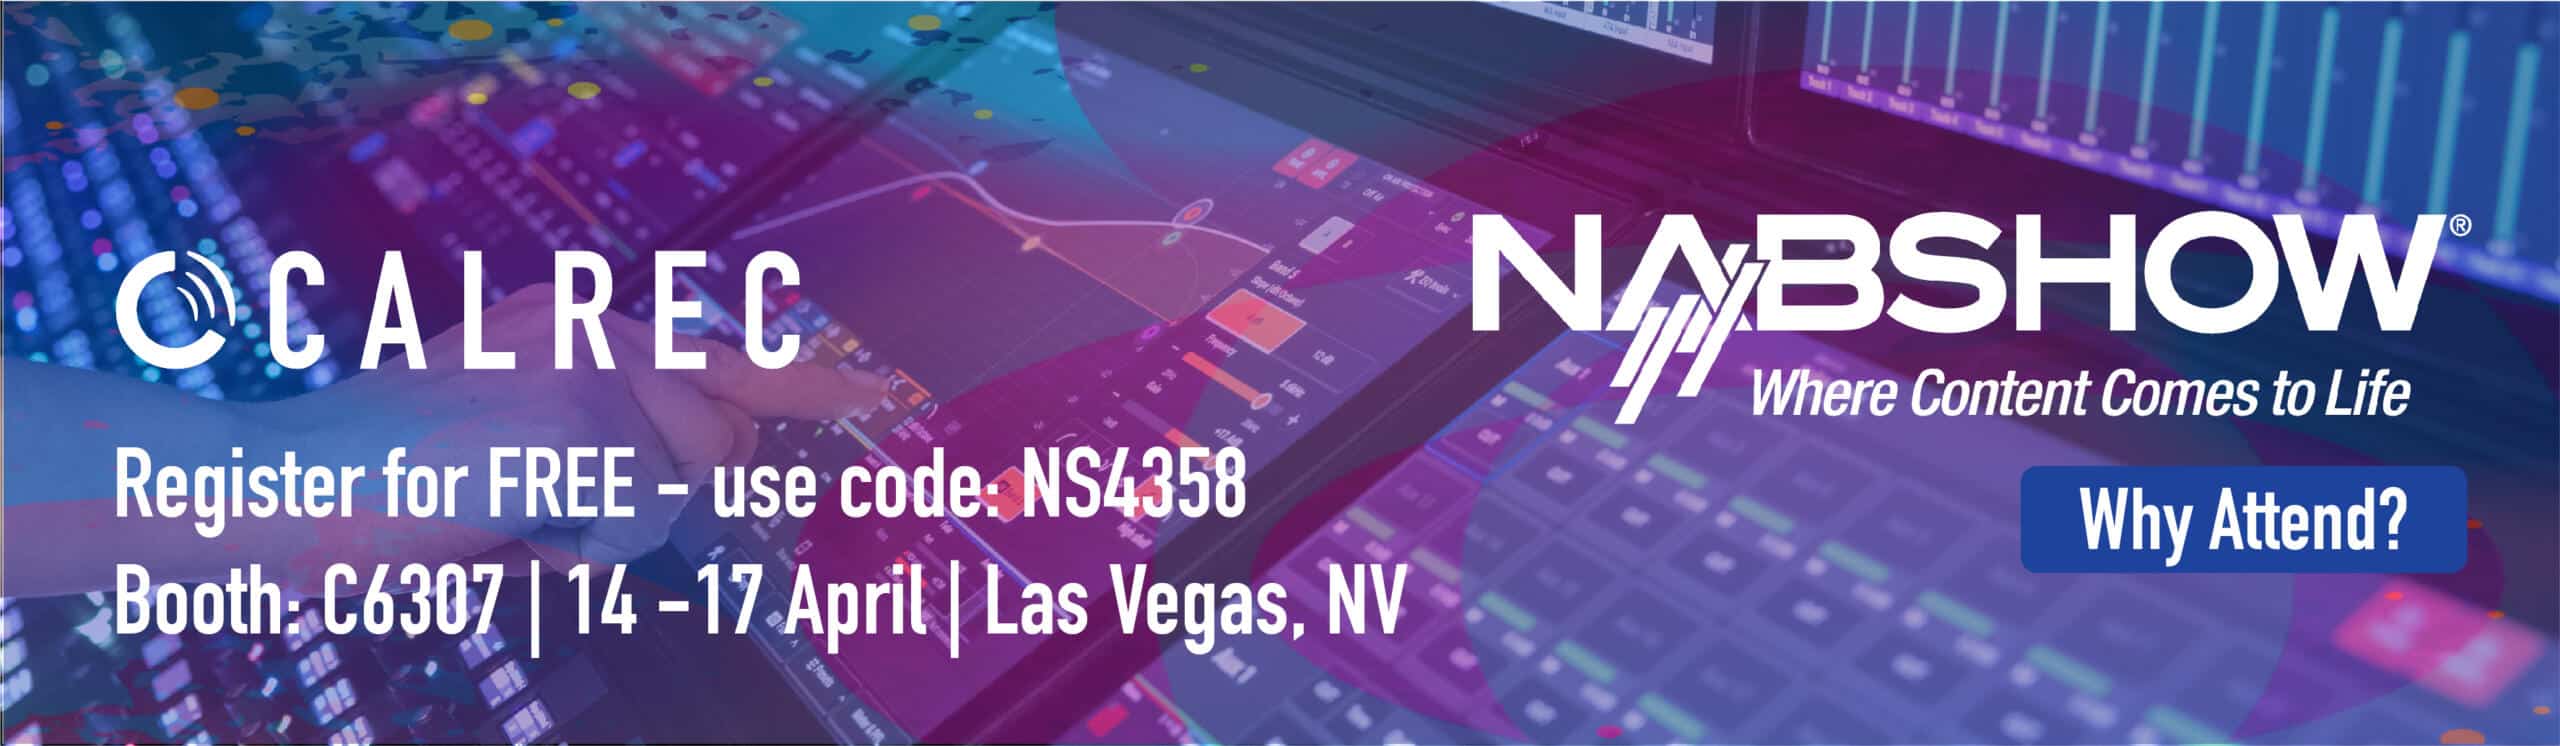 Join Calrec on booth C6307 at the NAB Show in Las Vegas